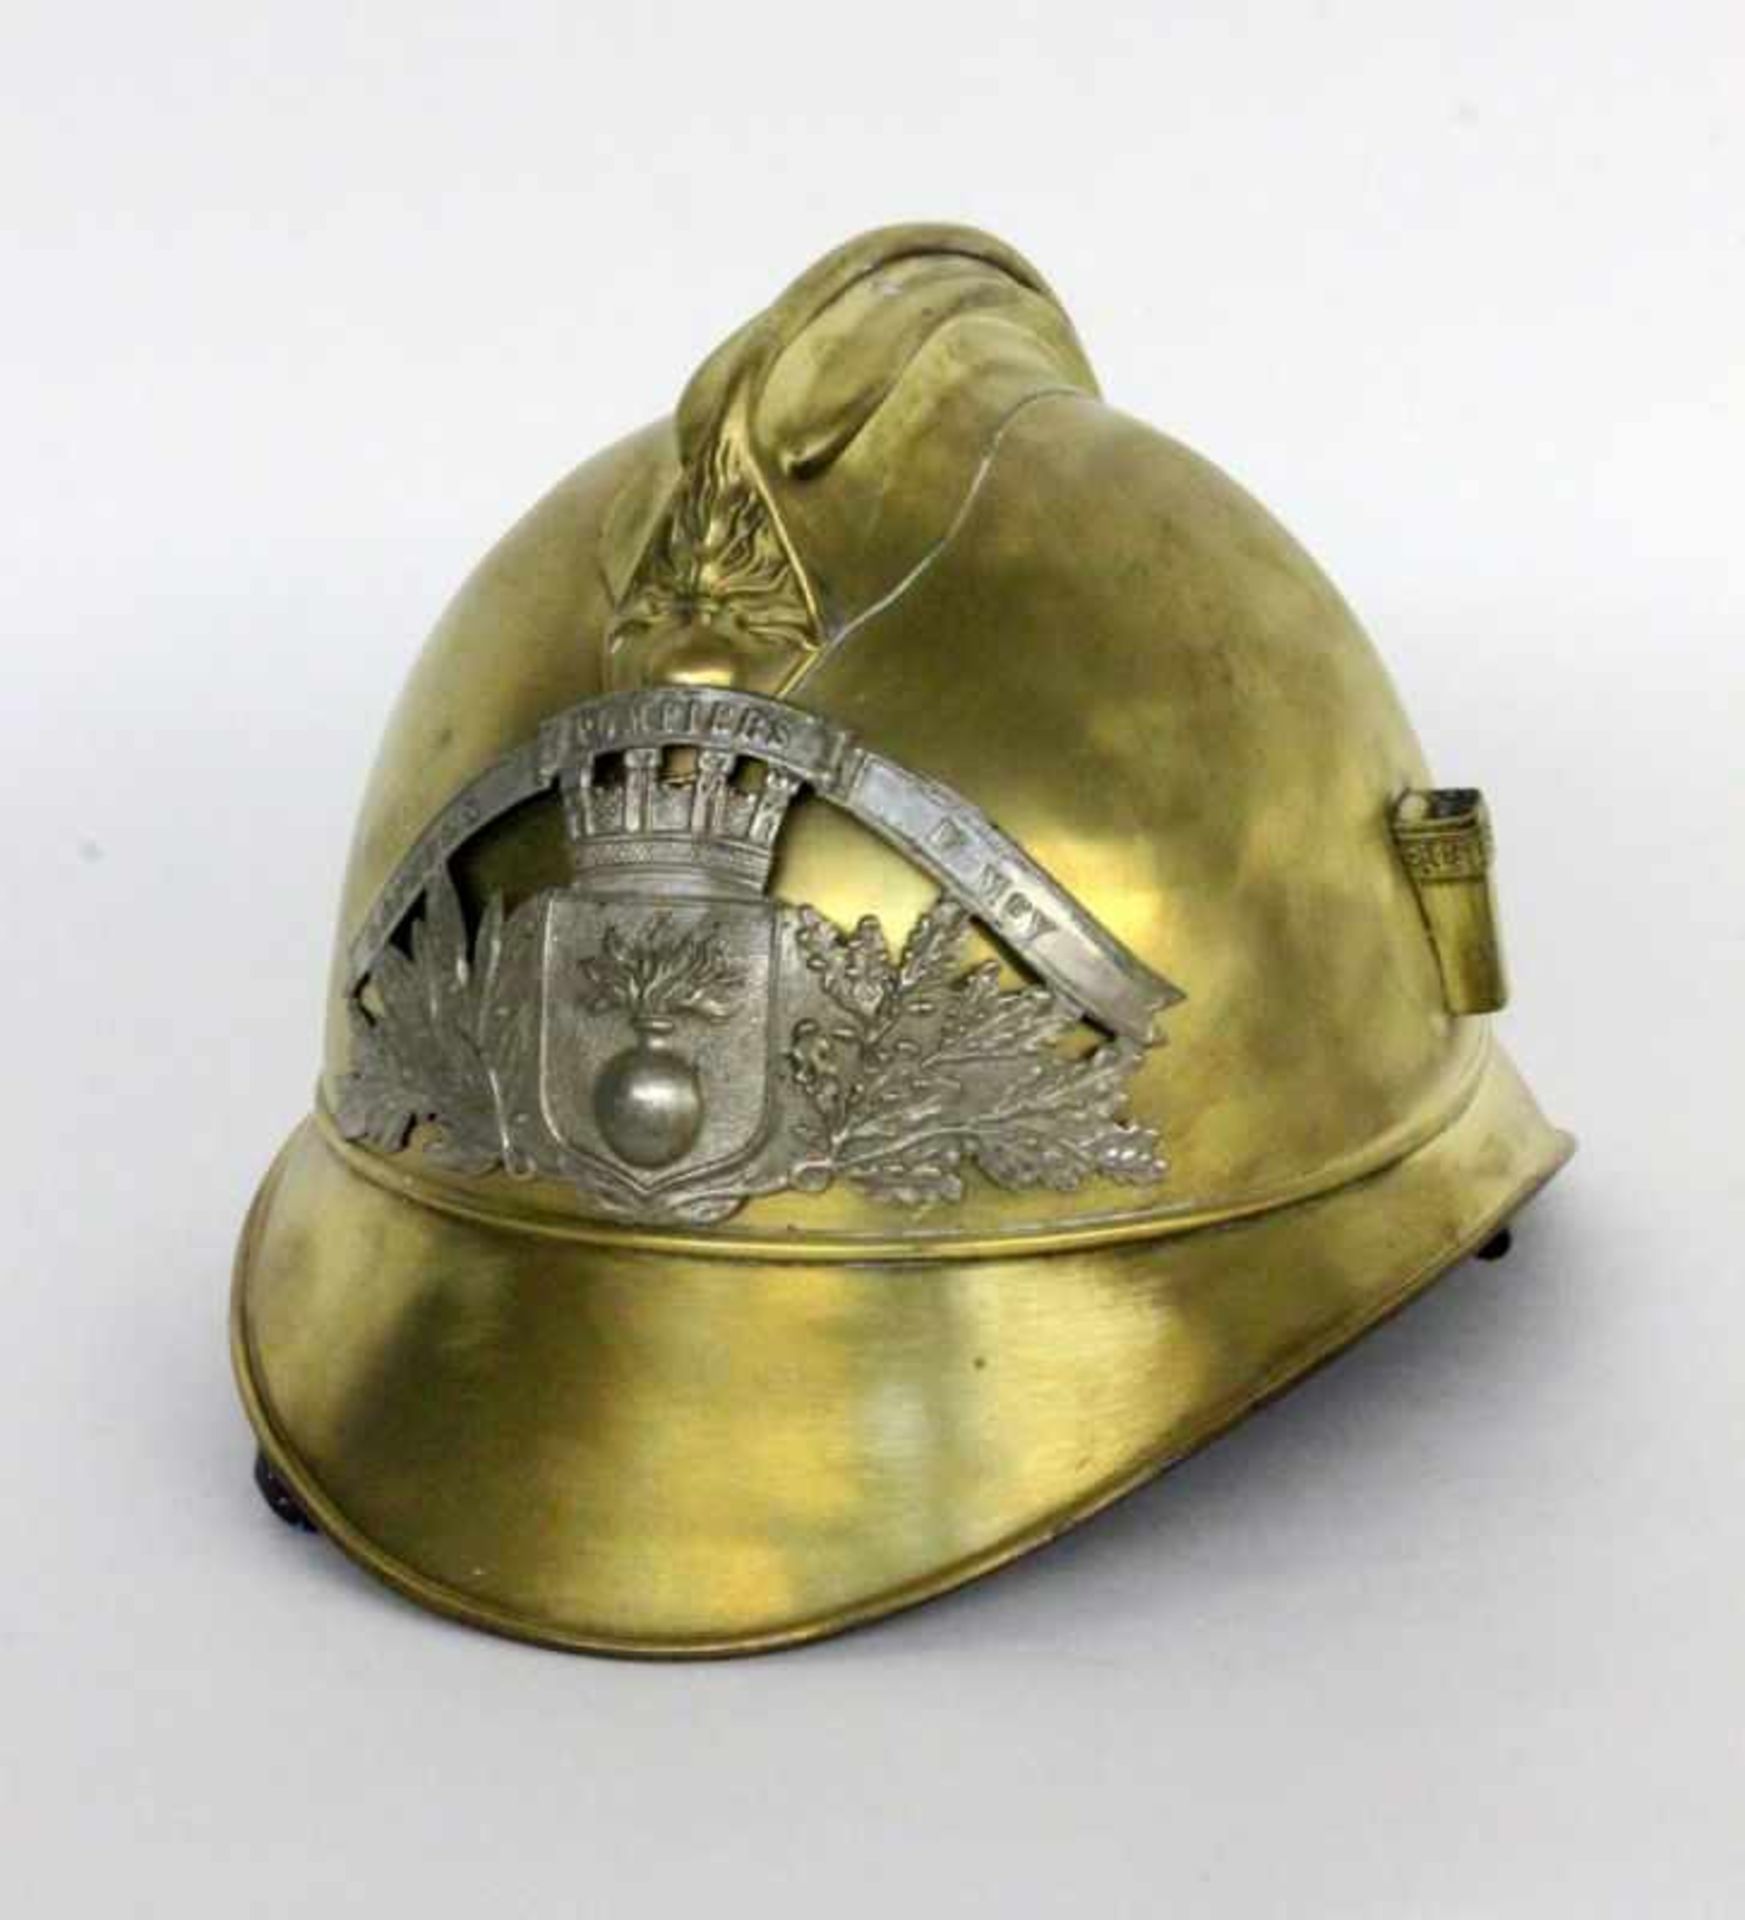 ''A FRENCH FIREMAN'S HELMET Brass with leather insert. Inscribed: ''Sapeurs Pompiers de